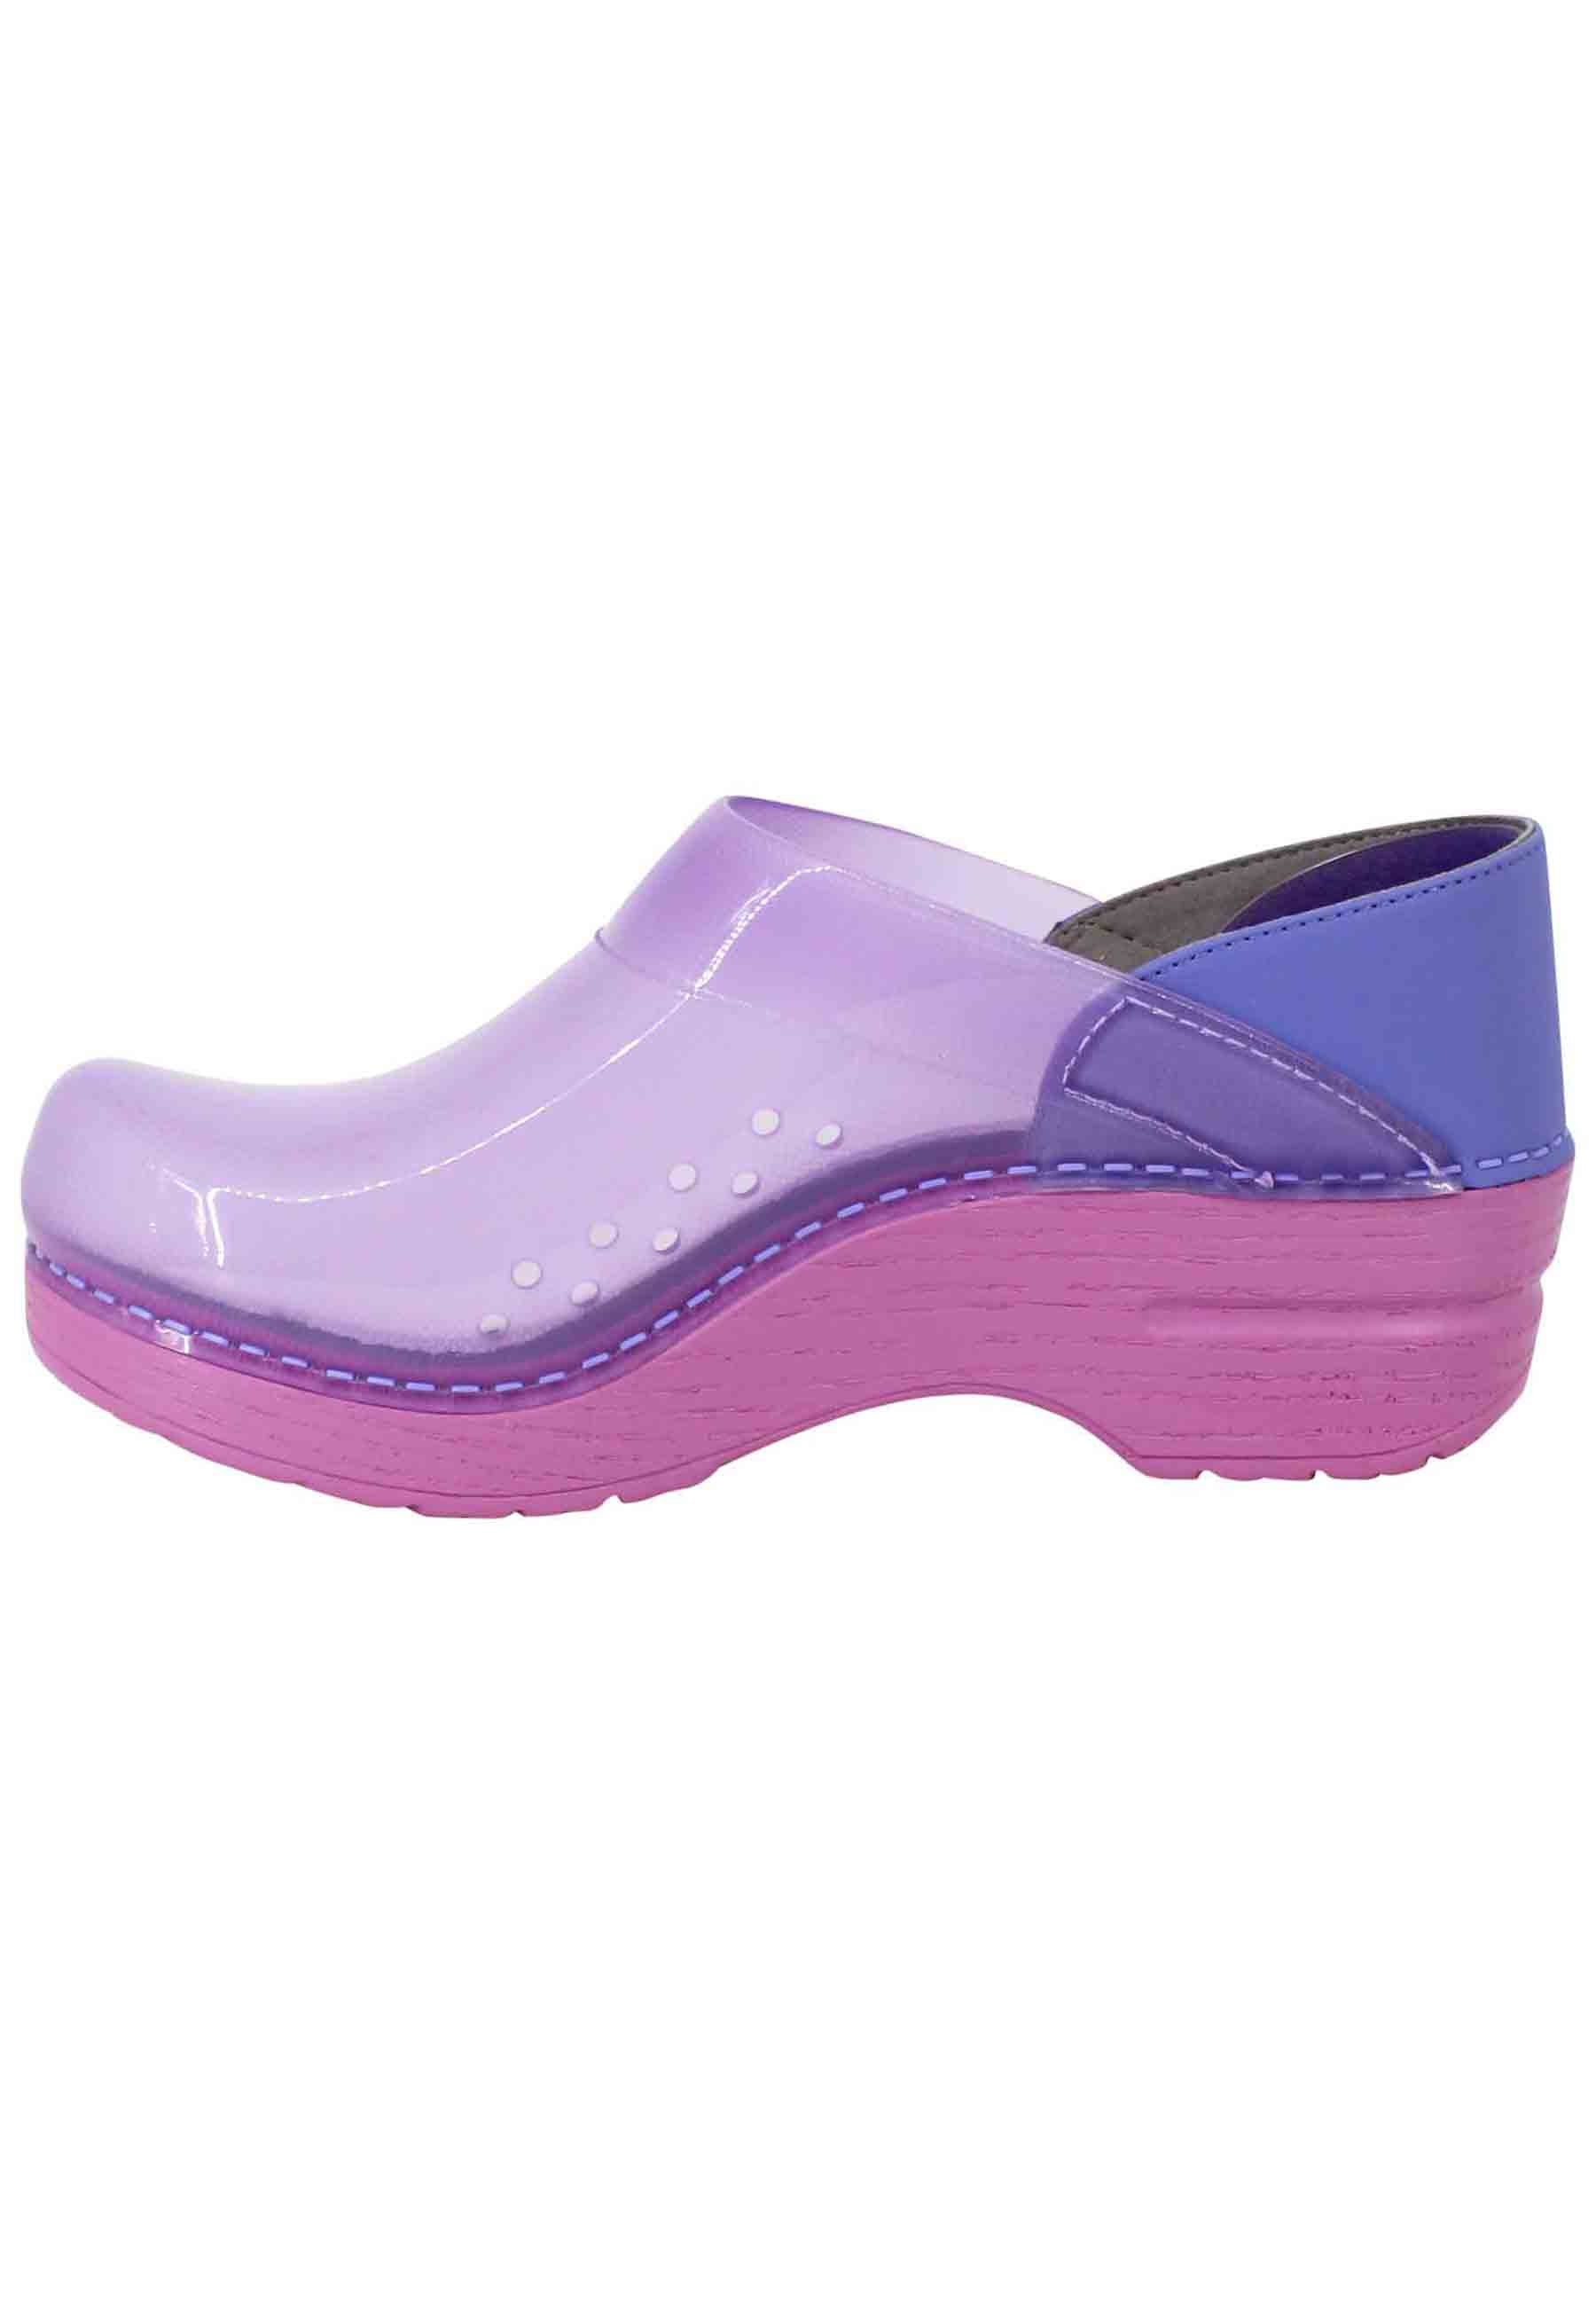 Women's clogs in purple plexy with lilac leather